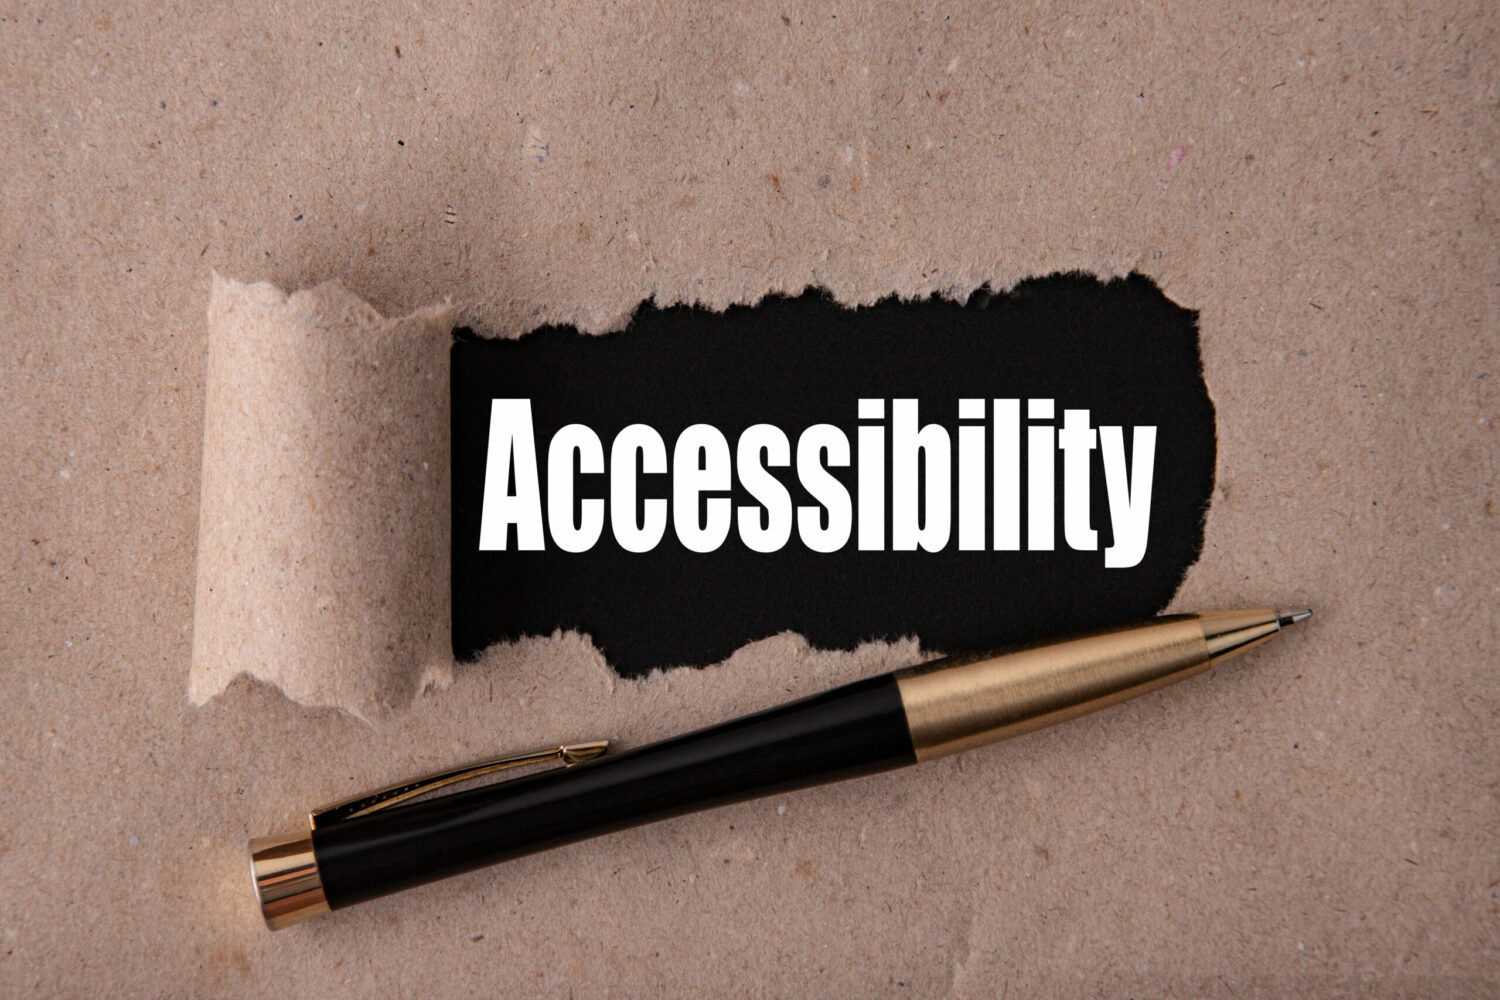 Read more about the article Web Accessibility 101: Recommendations from Equally AI’s Experts